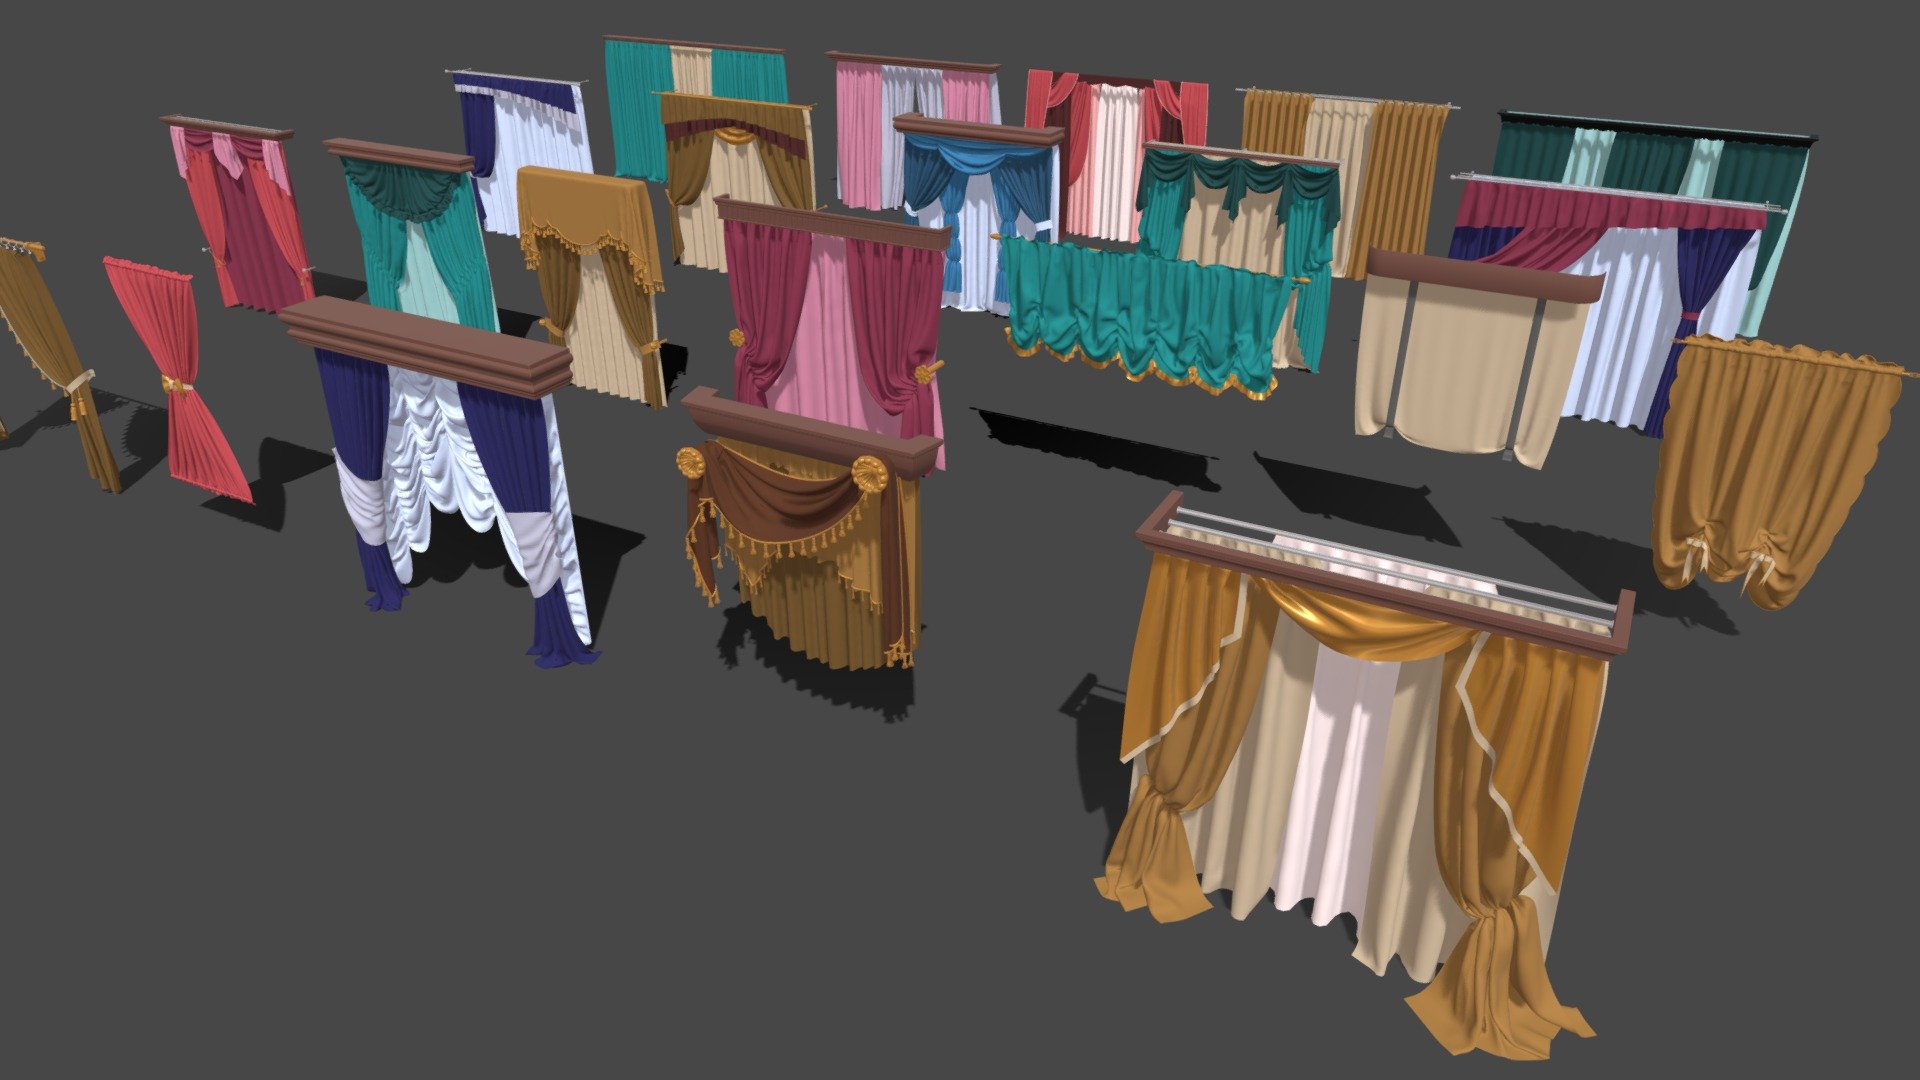 Get pack - https://www.artstation.com/a/4216087




middle poly curtains - 22 pieces

UW mapped

include max(2018), blend(2.8), fbx , obj and stl files

without textures and materials

poly - 1030232

vert - 1029737 - Curtains - part - 2 - 22 pieces - 3D model by 3d.armzep 3d model